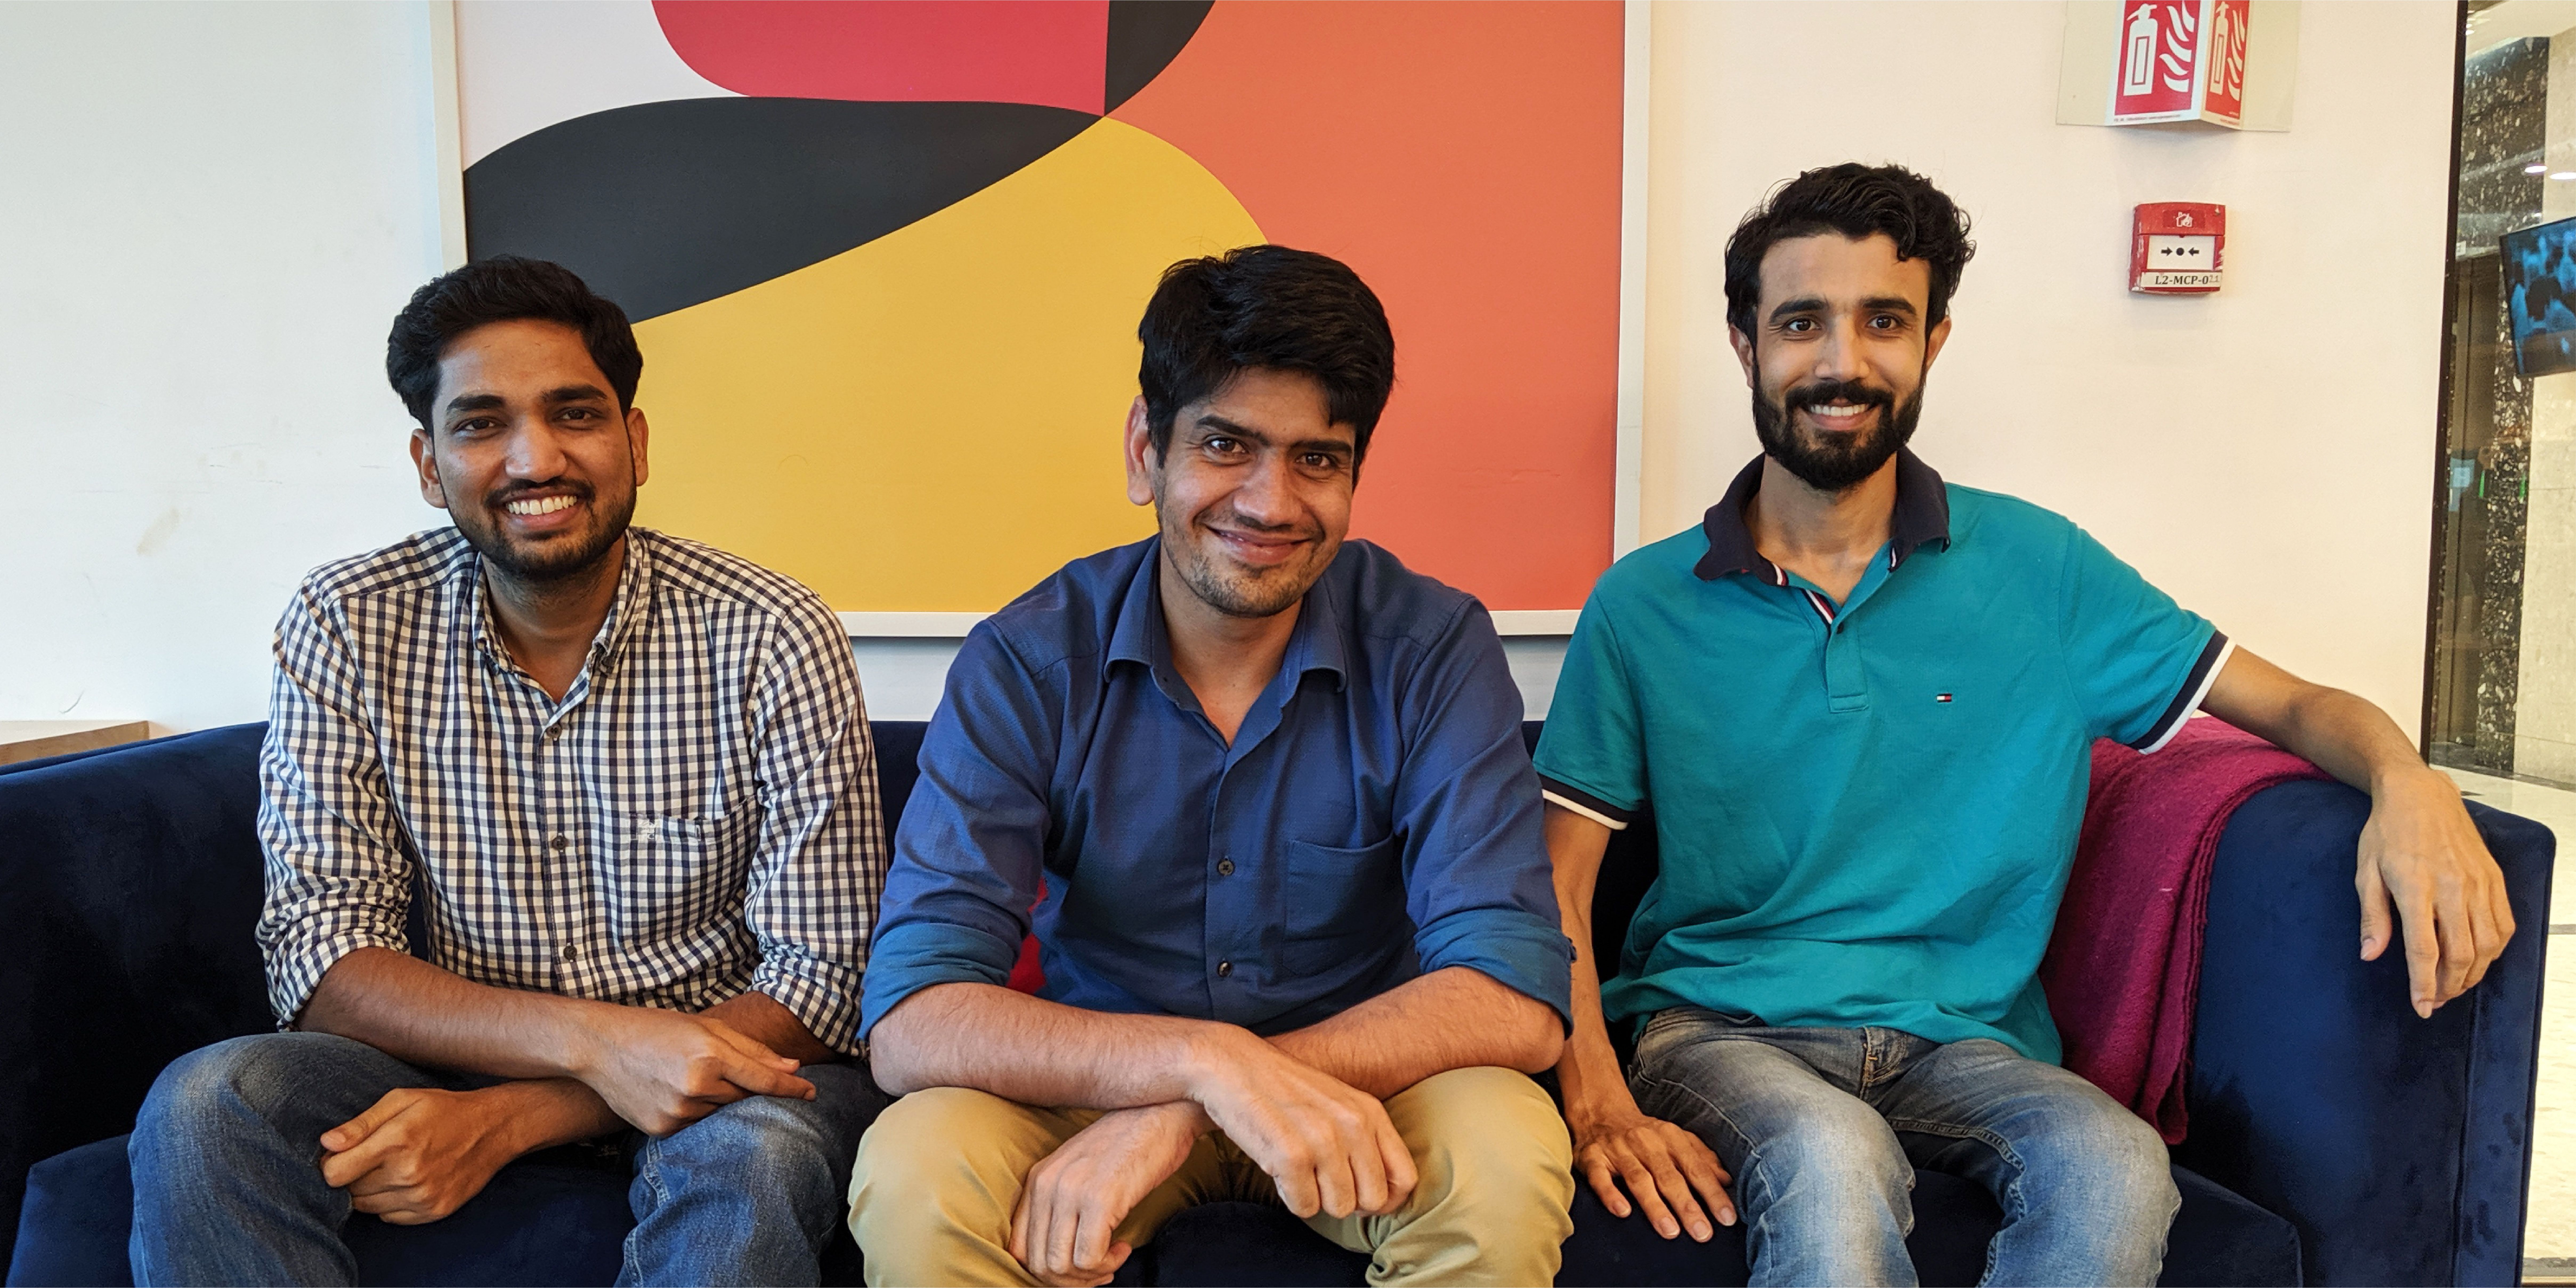 [Funding alert] Podcast startup Kuku FM raises funding from 3one4 Capital, Shunwei Capital, and India Quotient
